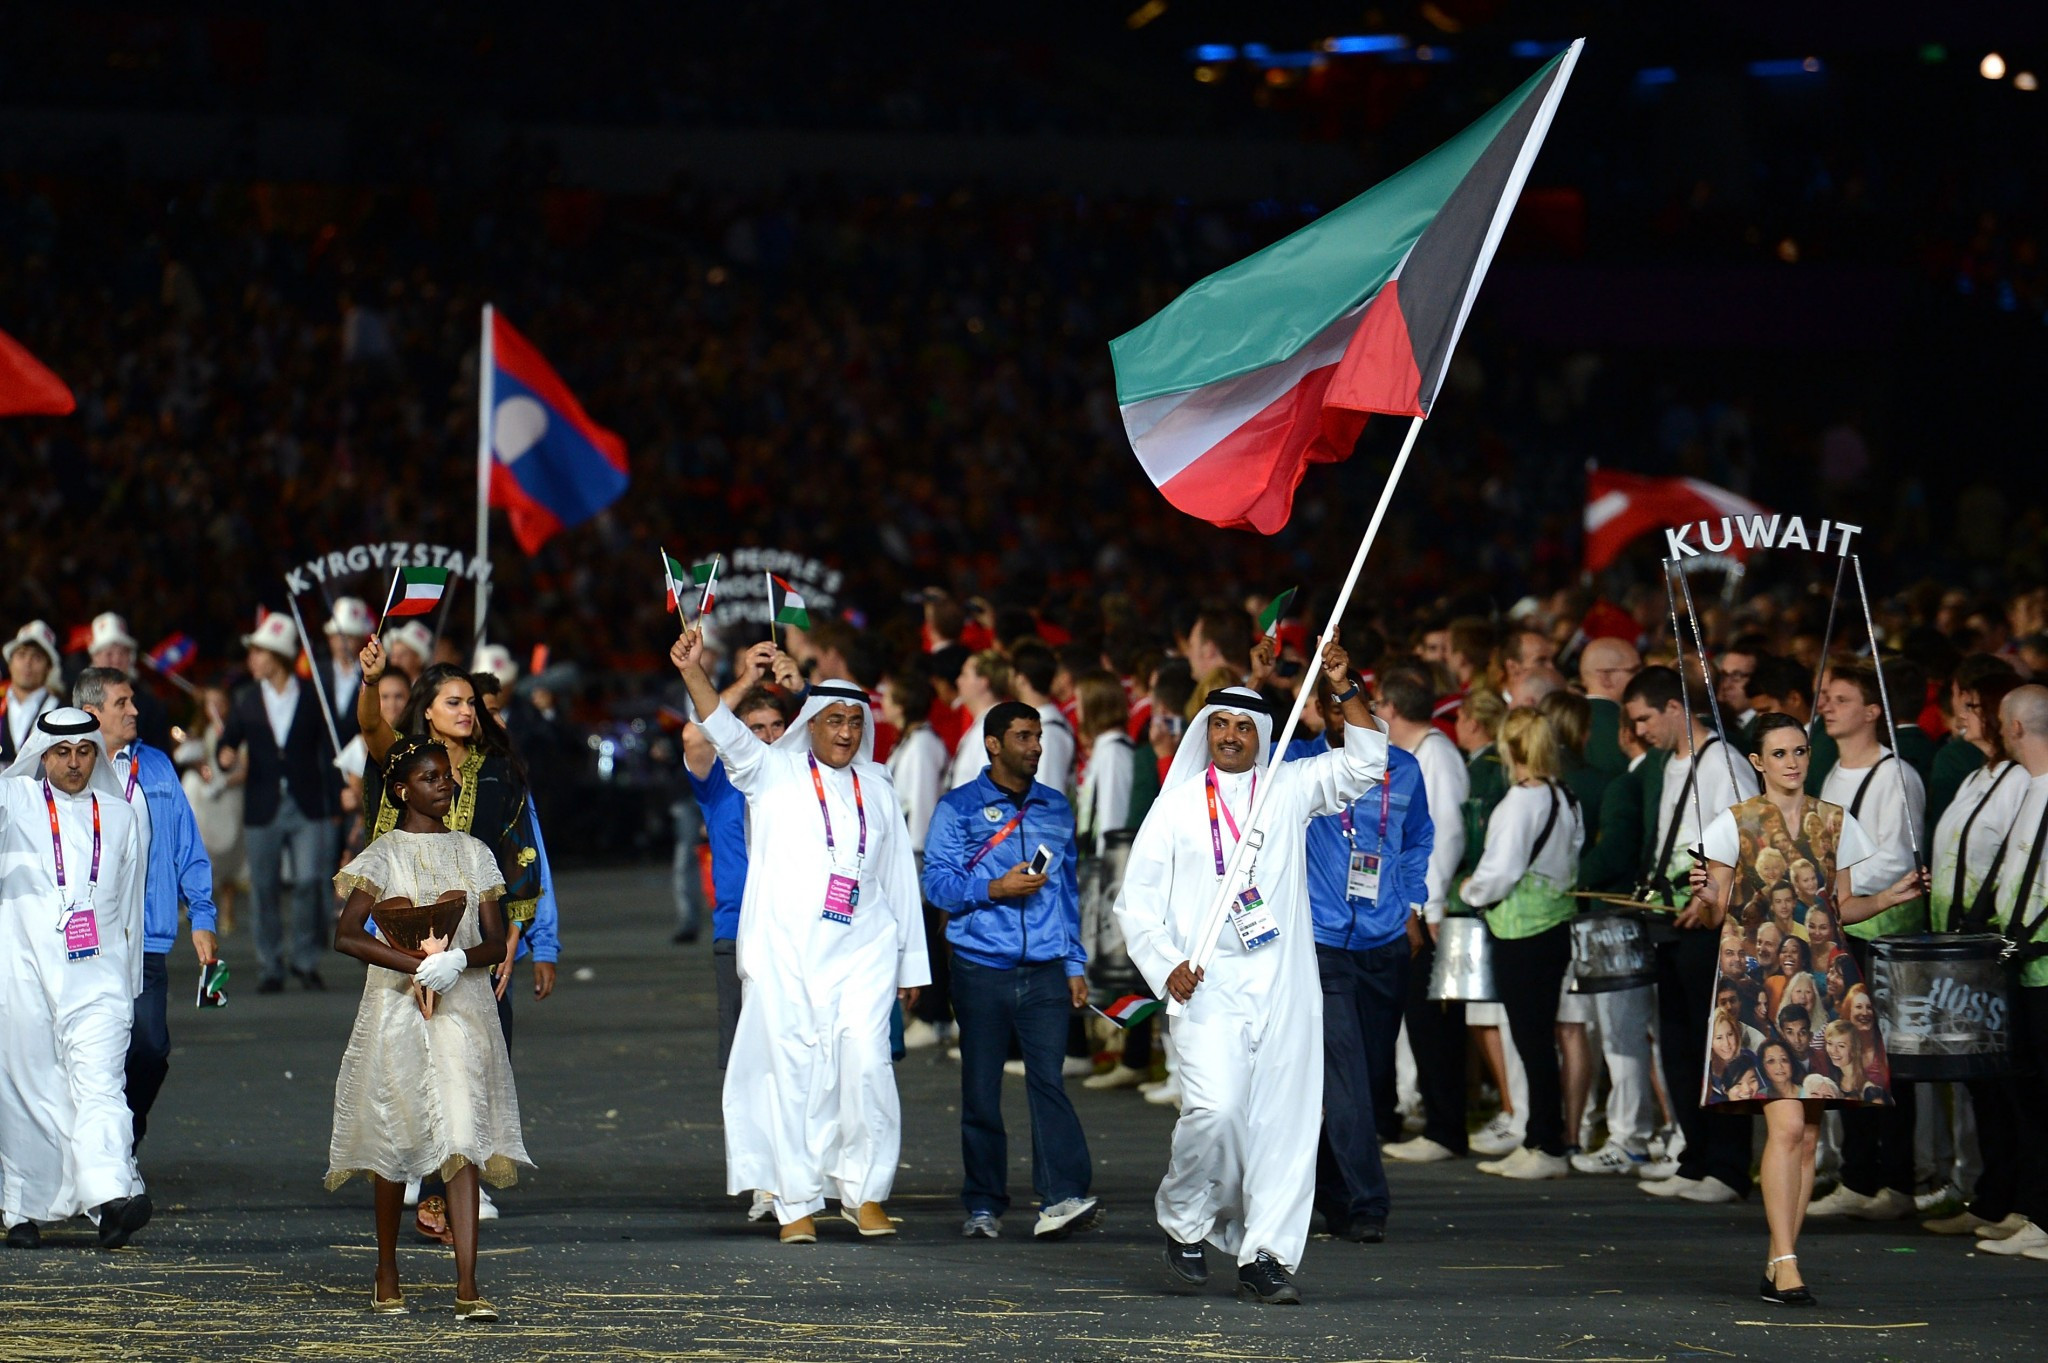 Kuwait, pictured marching at the Opening Ceremony of Rio 2016, are currently unable to compete under their own flag at the Olympics ©Getty Images